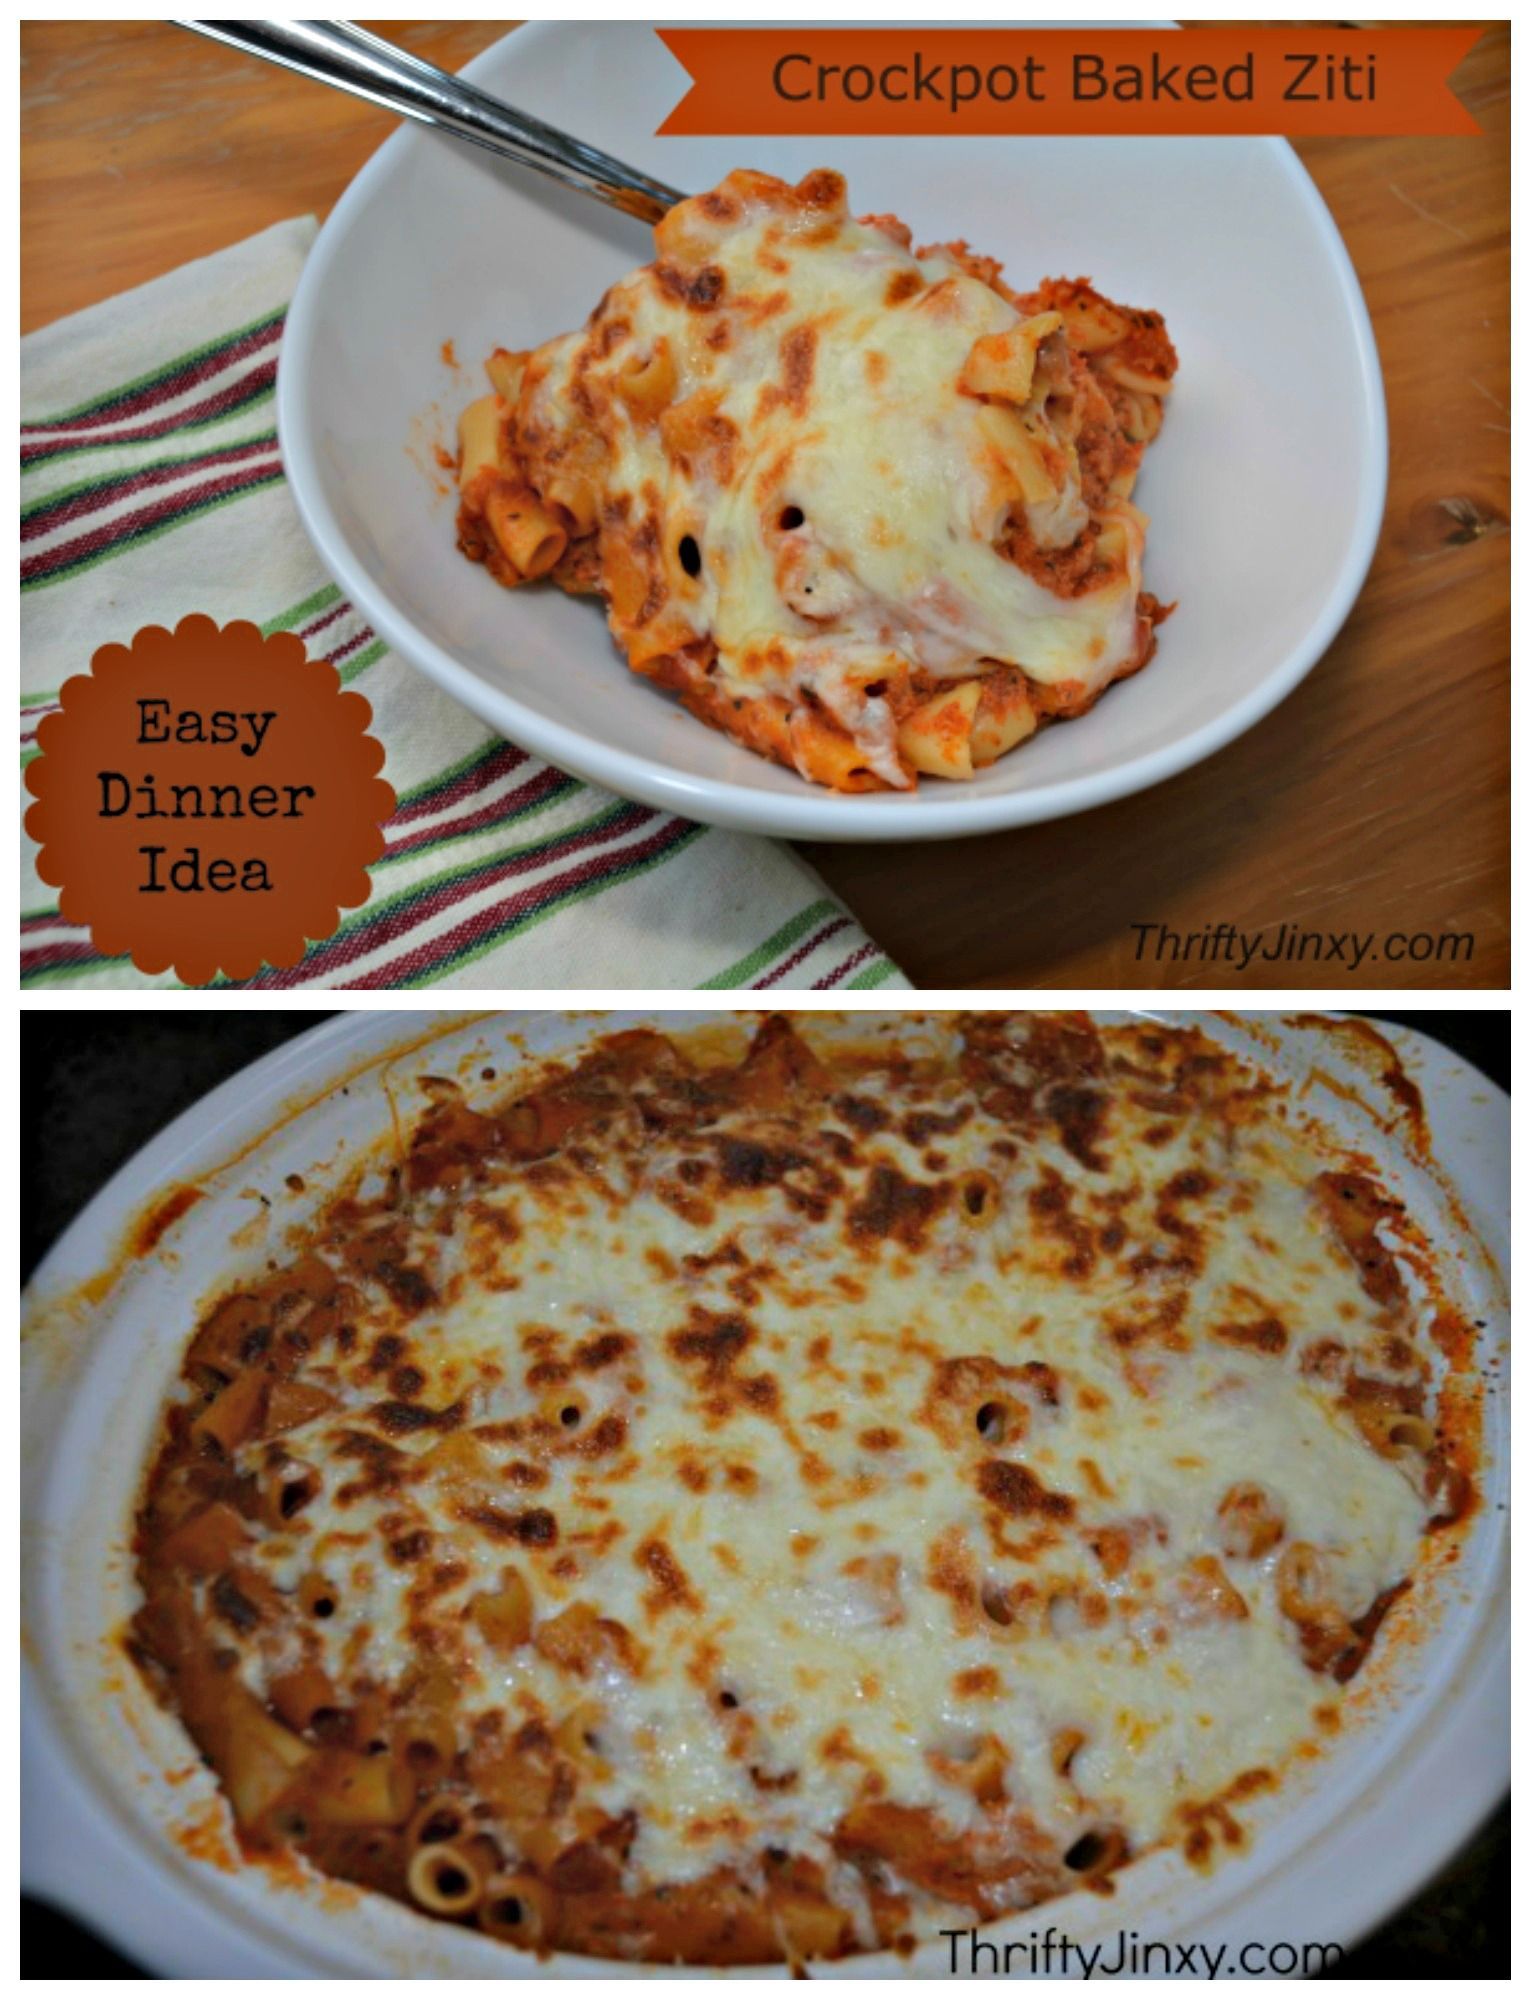 This no-boil Crockpot Baked Ziti Recipe is easy to throw together in the slow cooker in the morning to hav